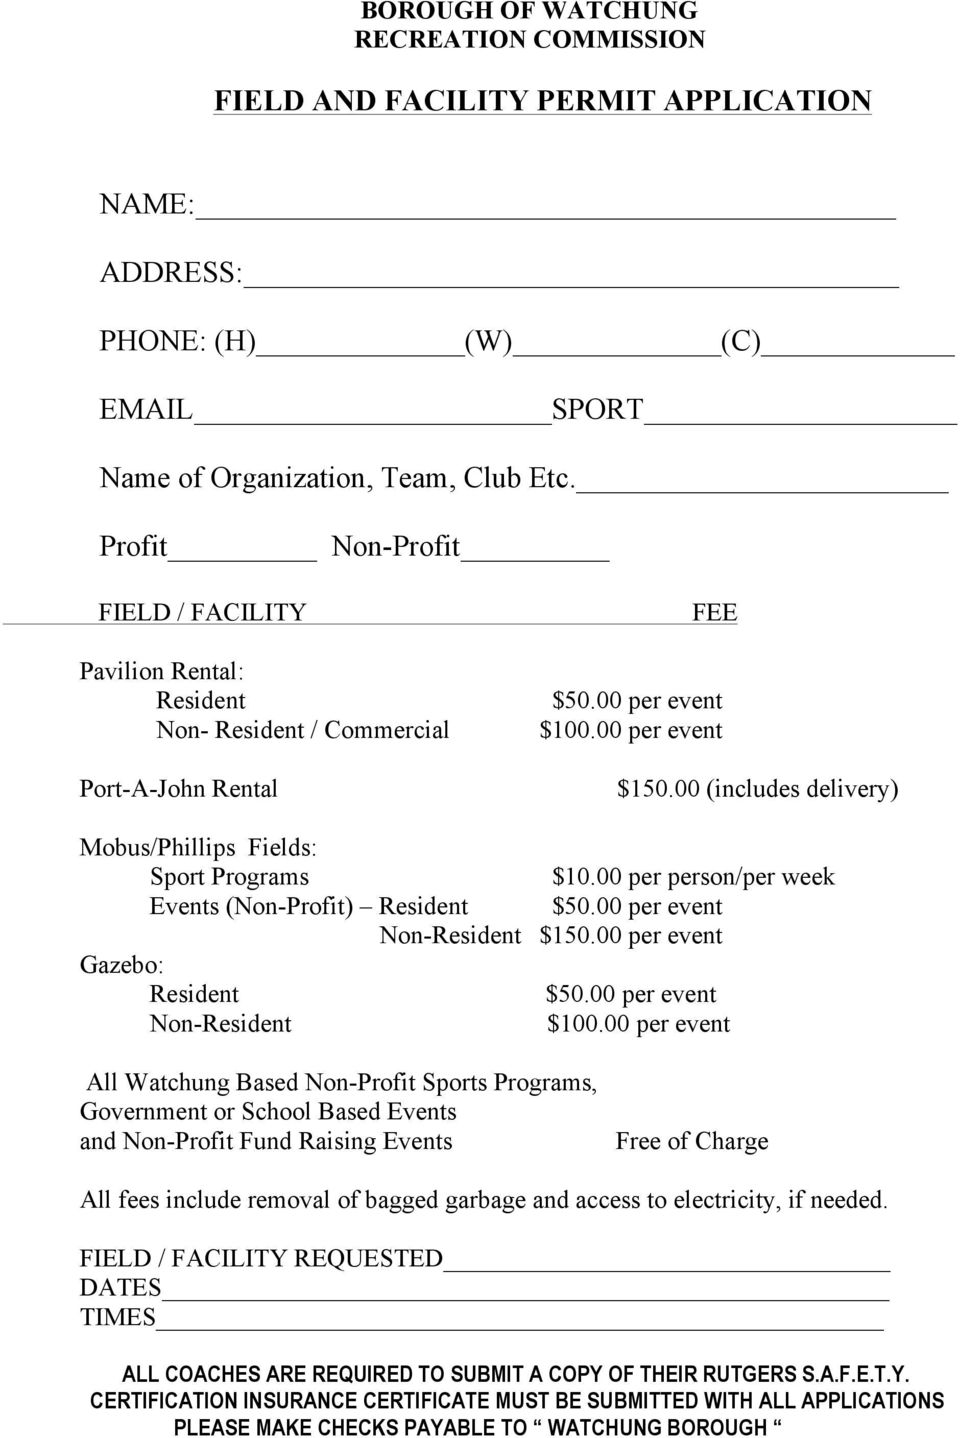 00 (includes delivery) Mobus/Phillips Fields: Sport Programs $10.00 per person/per week Events (Non-Profit) Resident $50.00 per event Non-Resident $150.00 per event Gazebo: Resident $50.